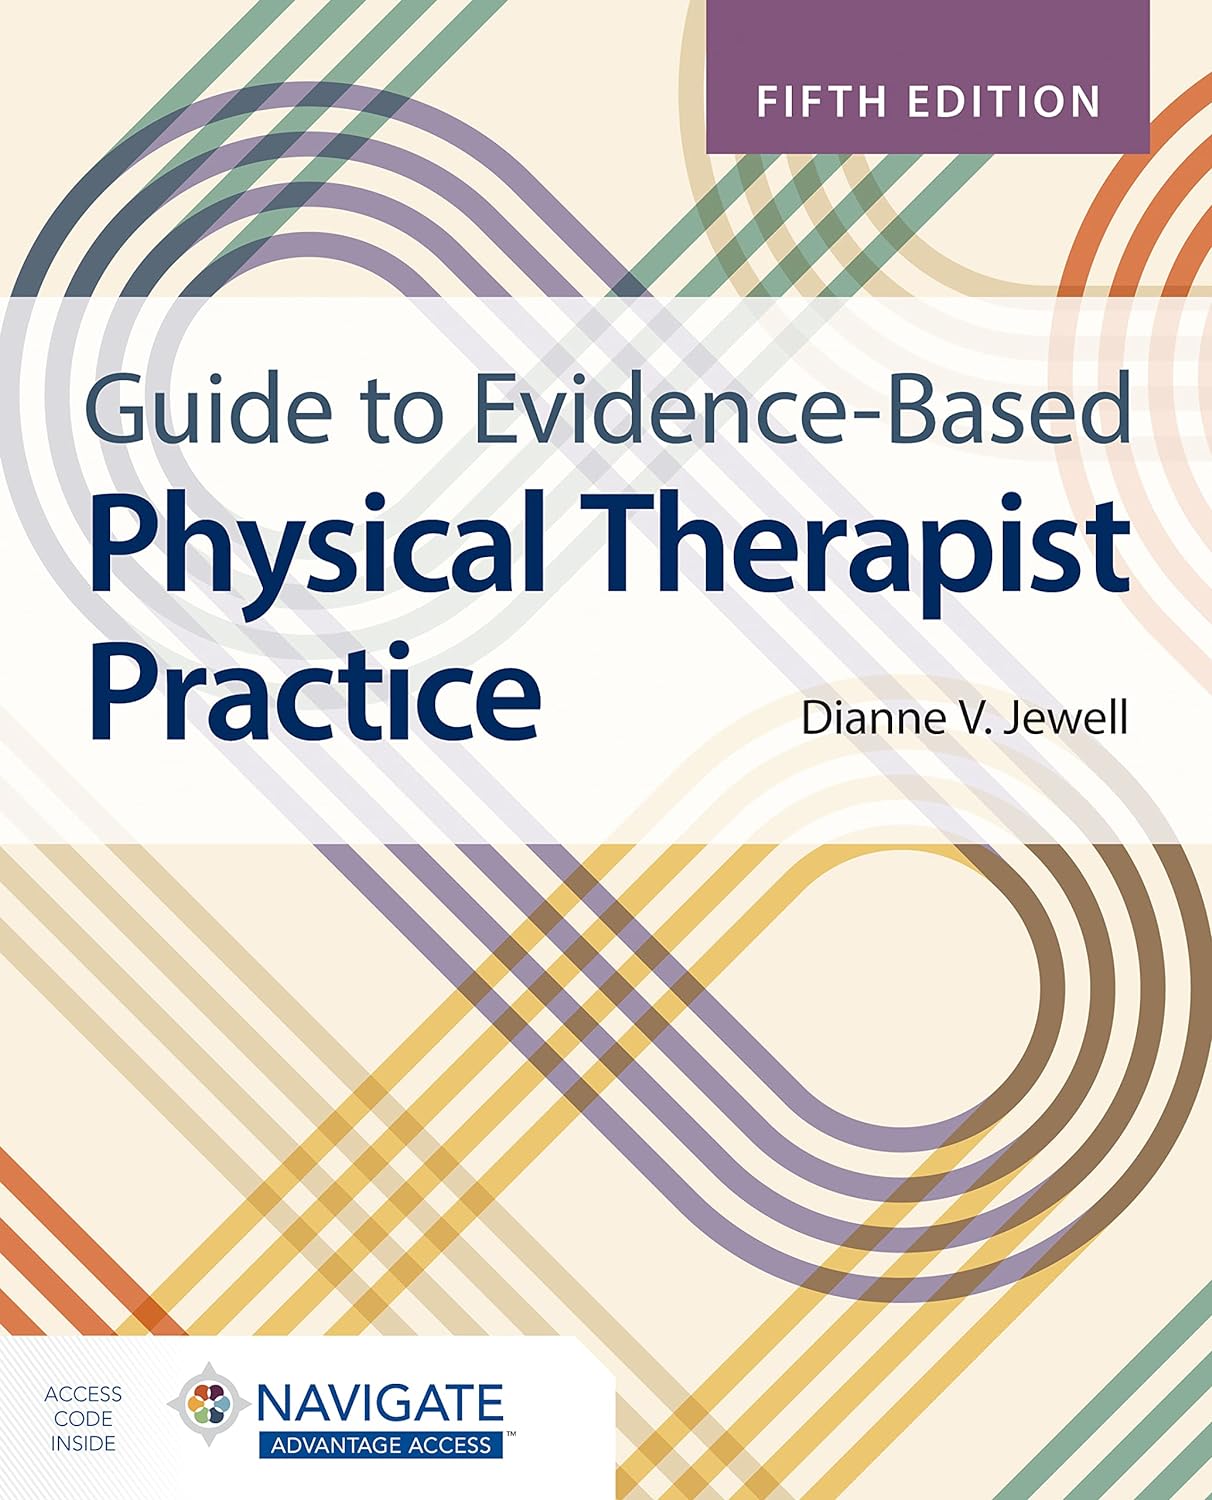 Guide to Evidence-Based Physical Therapist Practice, 5th Edition  by Dianne V. Jewell